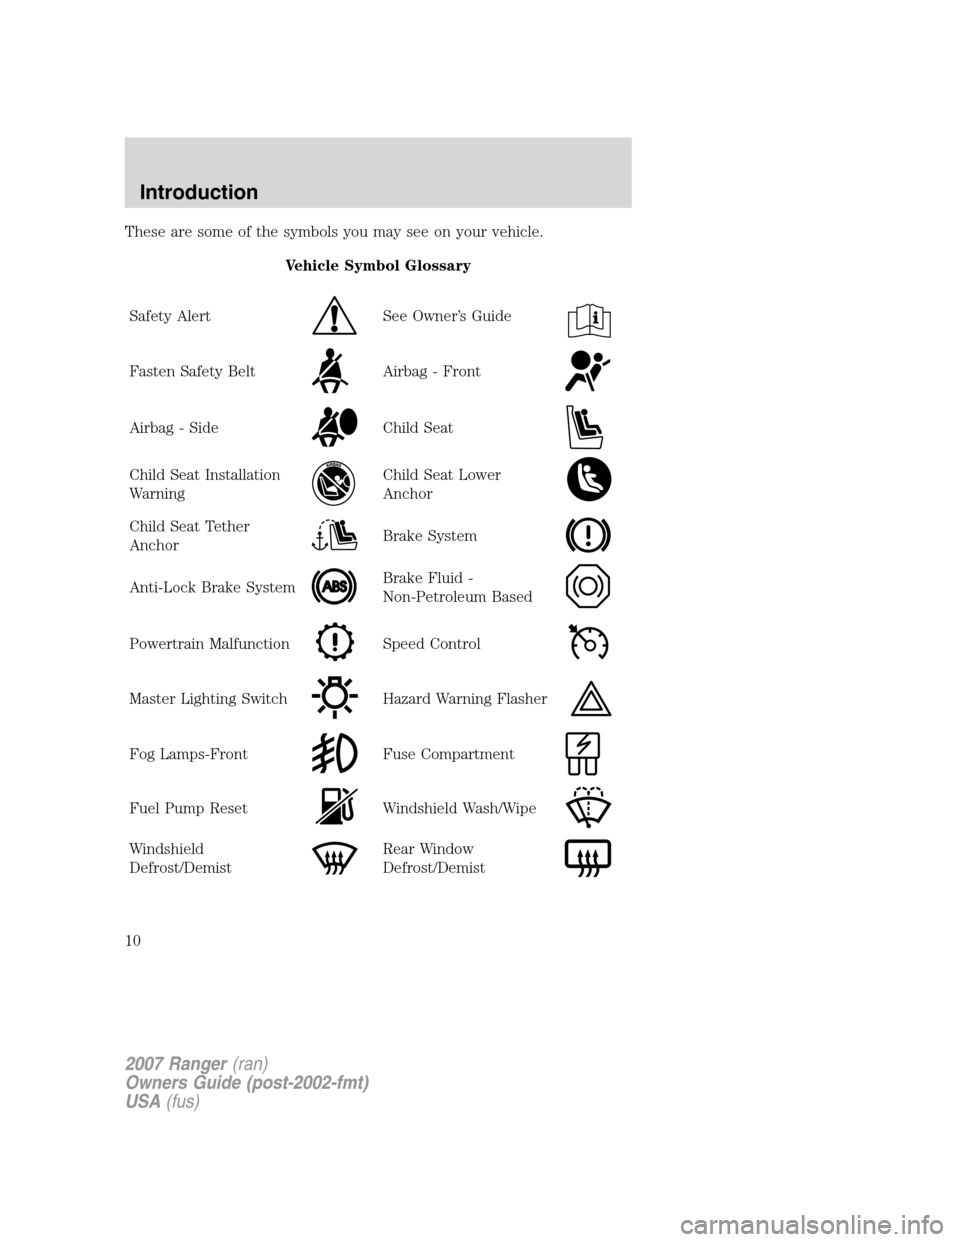 FORD RANGER 2007 2.G Owners Manual These are some of the symbols you may see on your vehicle.
Vehicle Symbol Glossary
Safety Alert
See Owner’s Guide
Fasten Safety BeltAirbag - Front
Airbag - SideChild Seat
Child Seat Installation
War